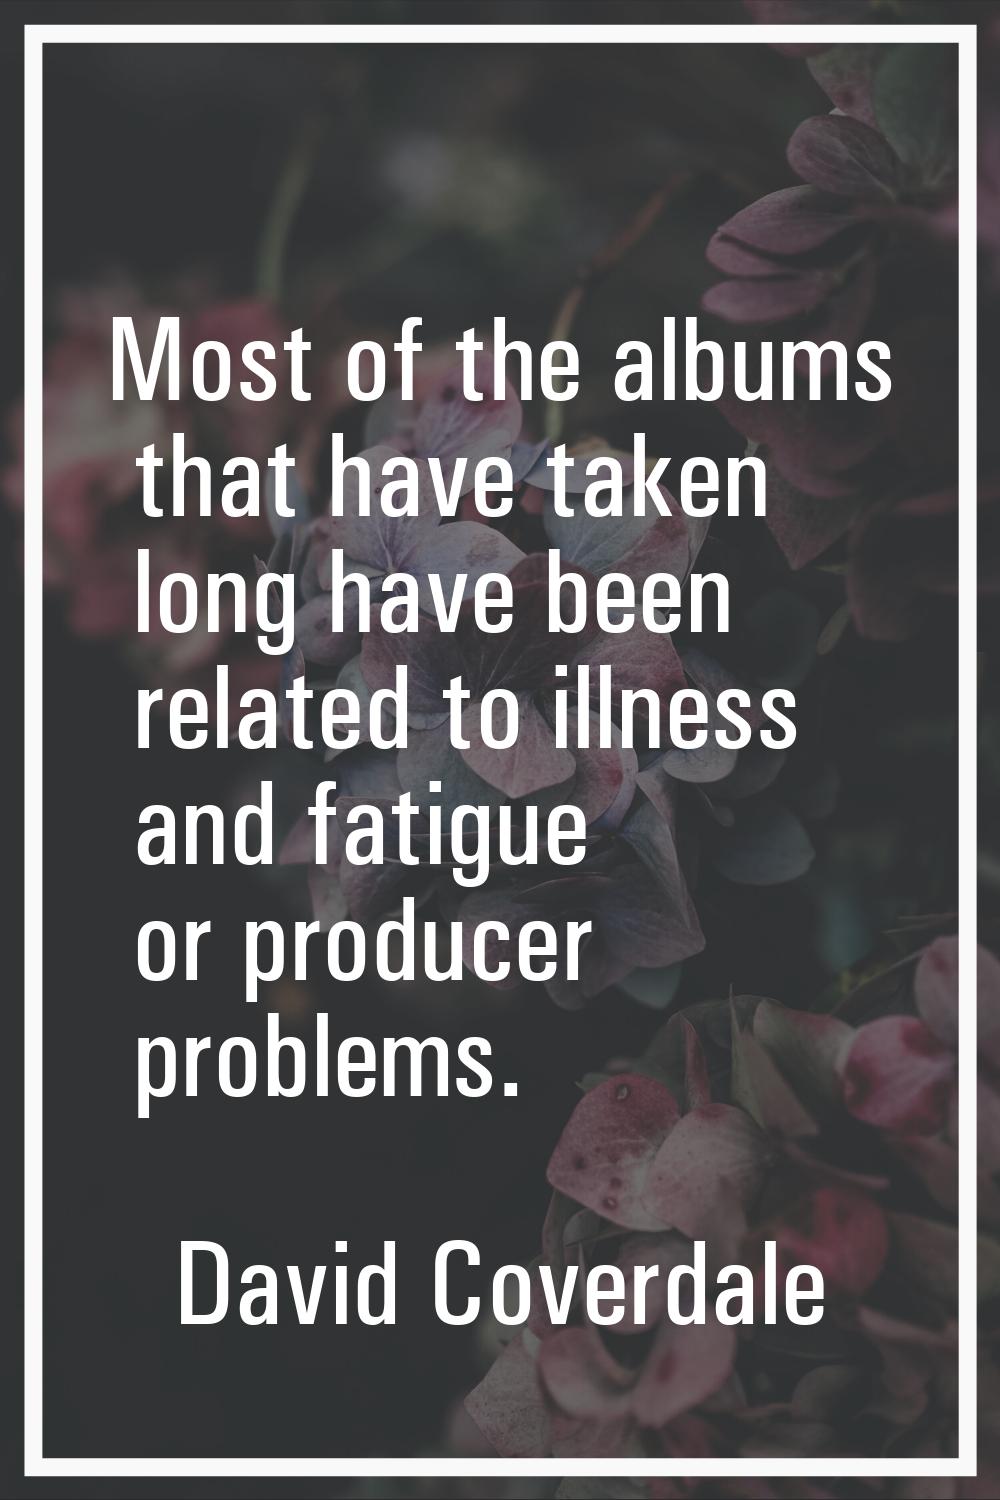 Most of the albums that have taken long have been related to illness and fatigue or producer proble